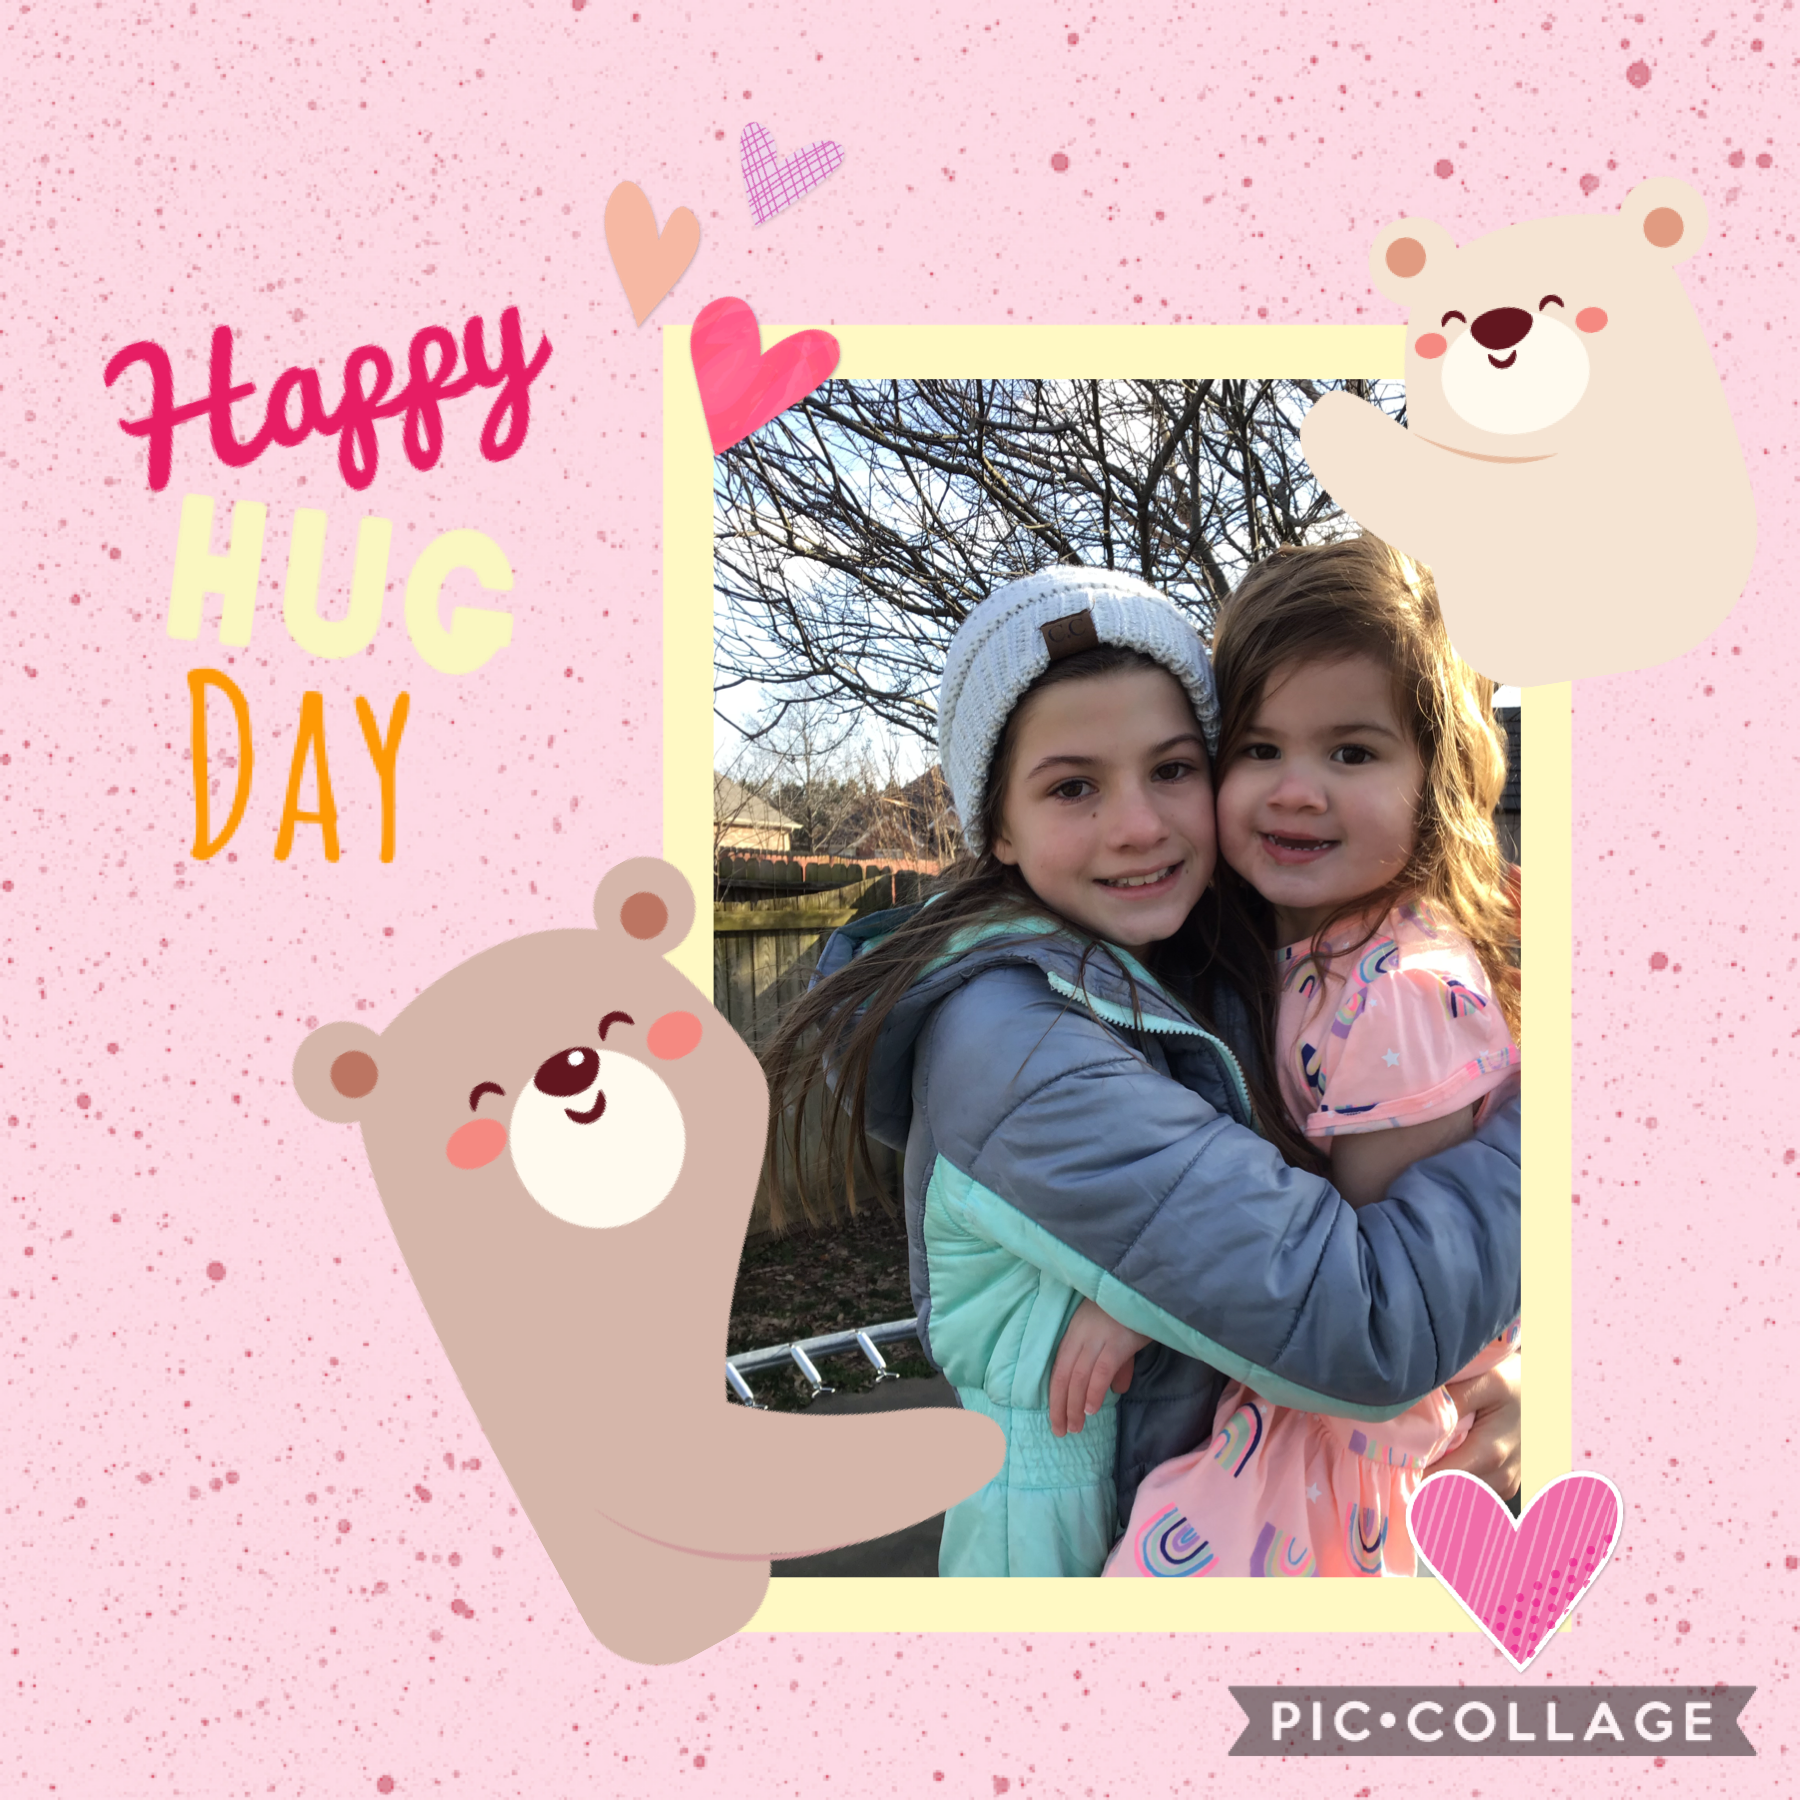 My BFF and my little sister! Like if you have a little sis and a best friend 